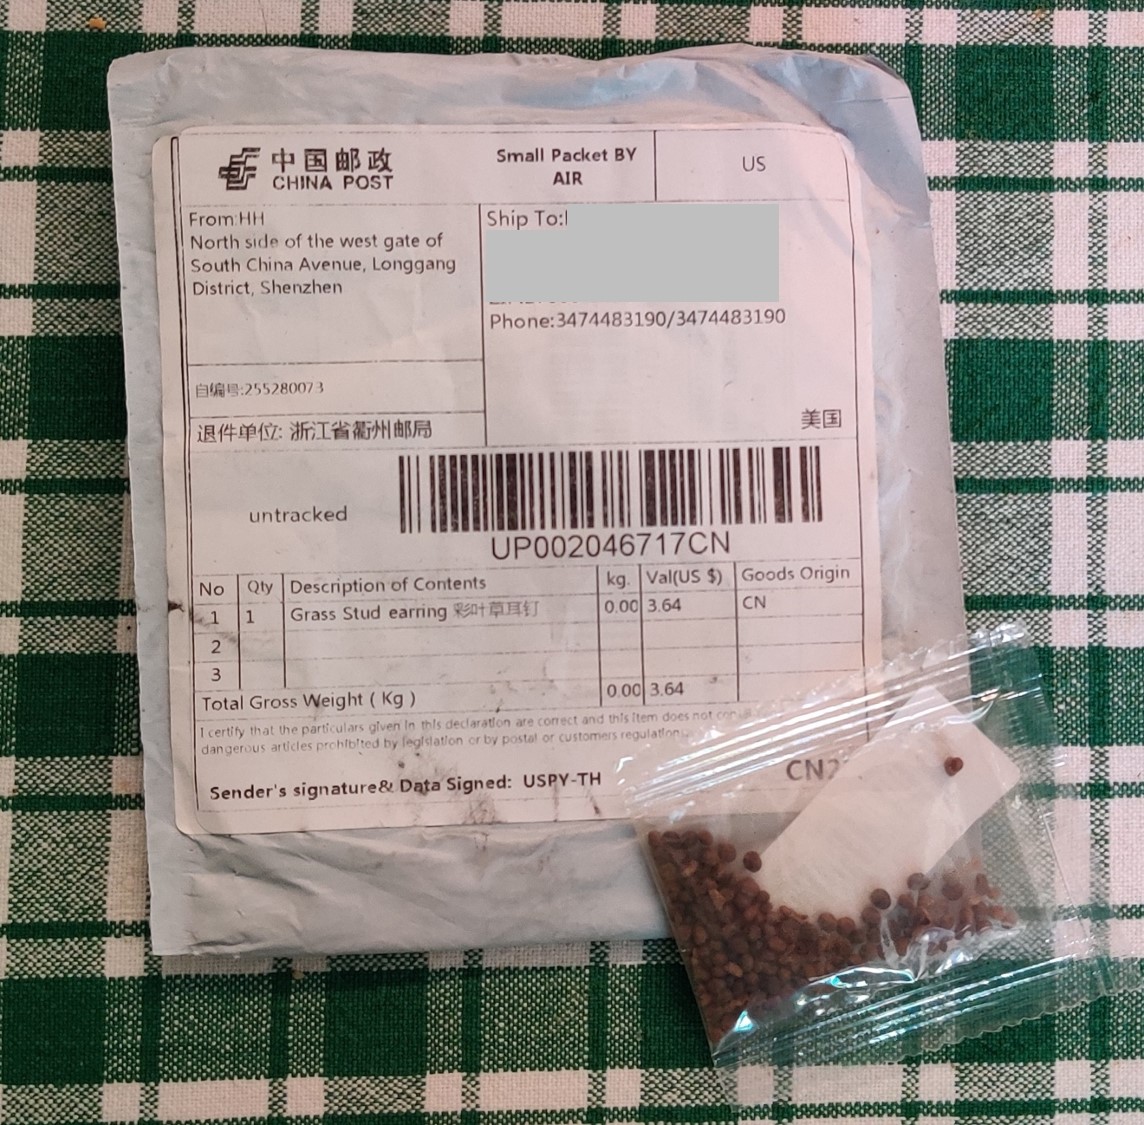 Unsolicited seed package